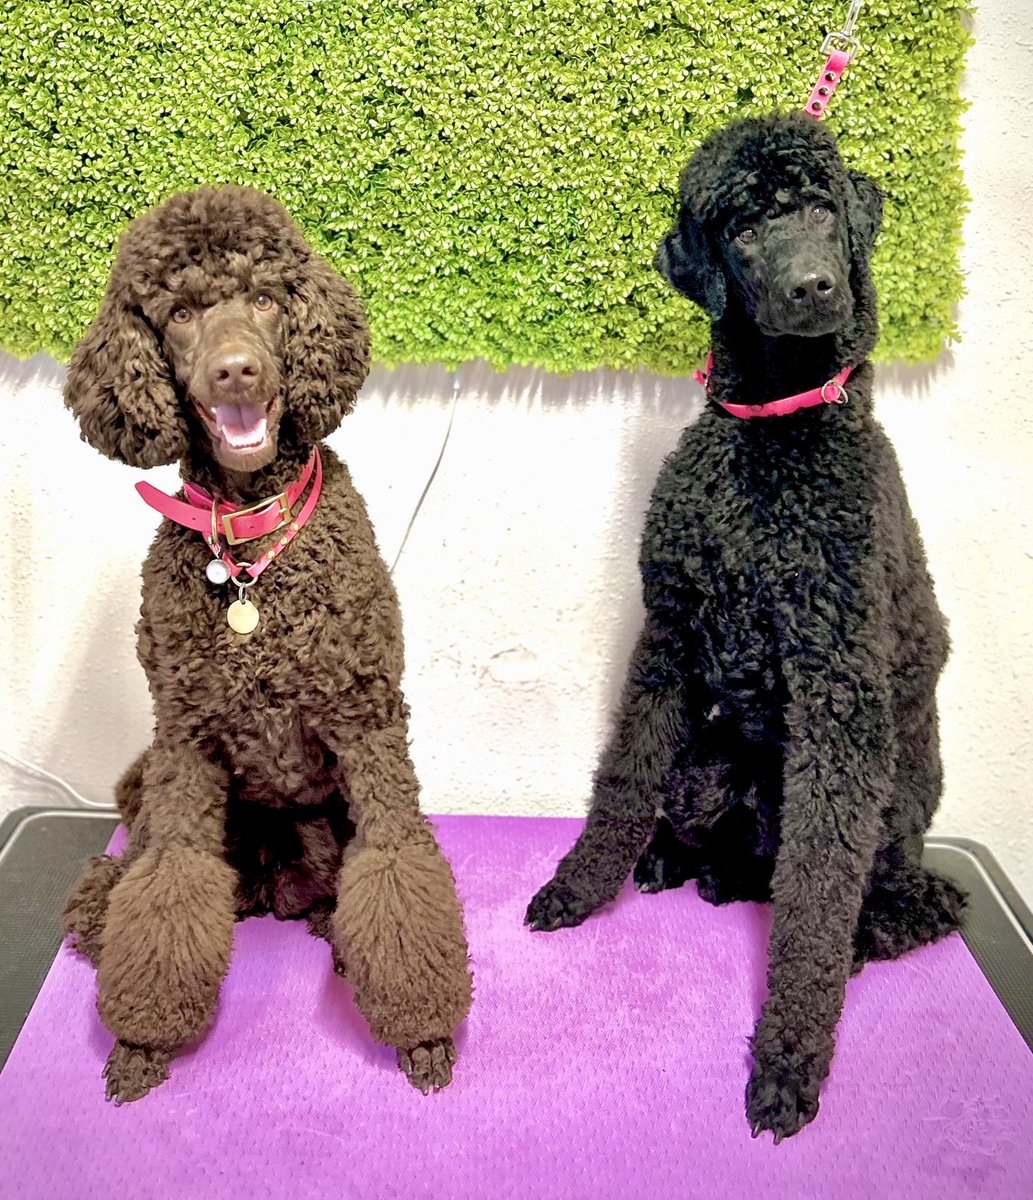 10 month old Luka the Wonder Puppy 🌟💯 poses on the grooming table with his girlfriend, Willow 💕